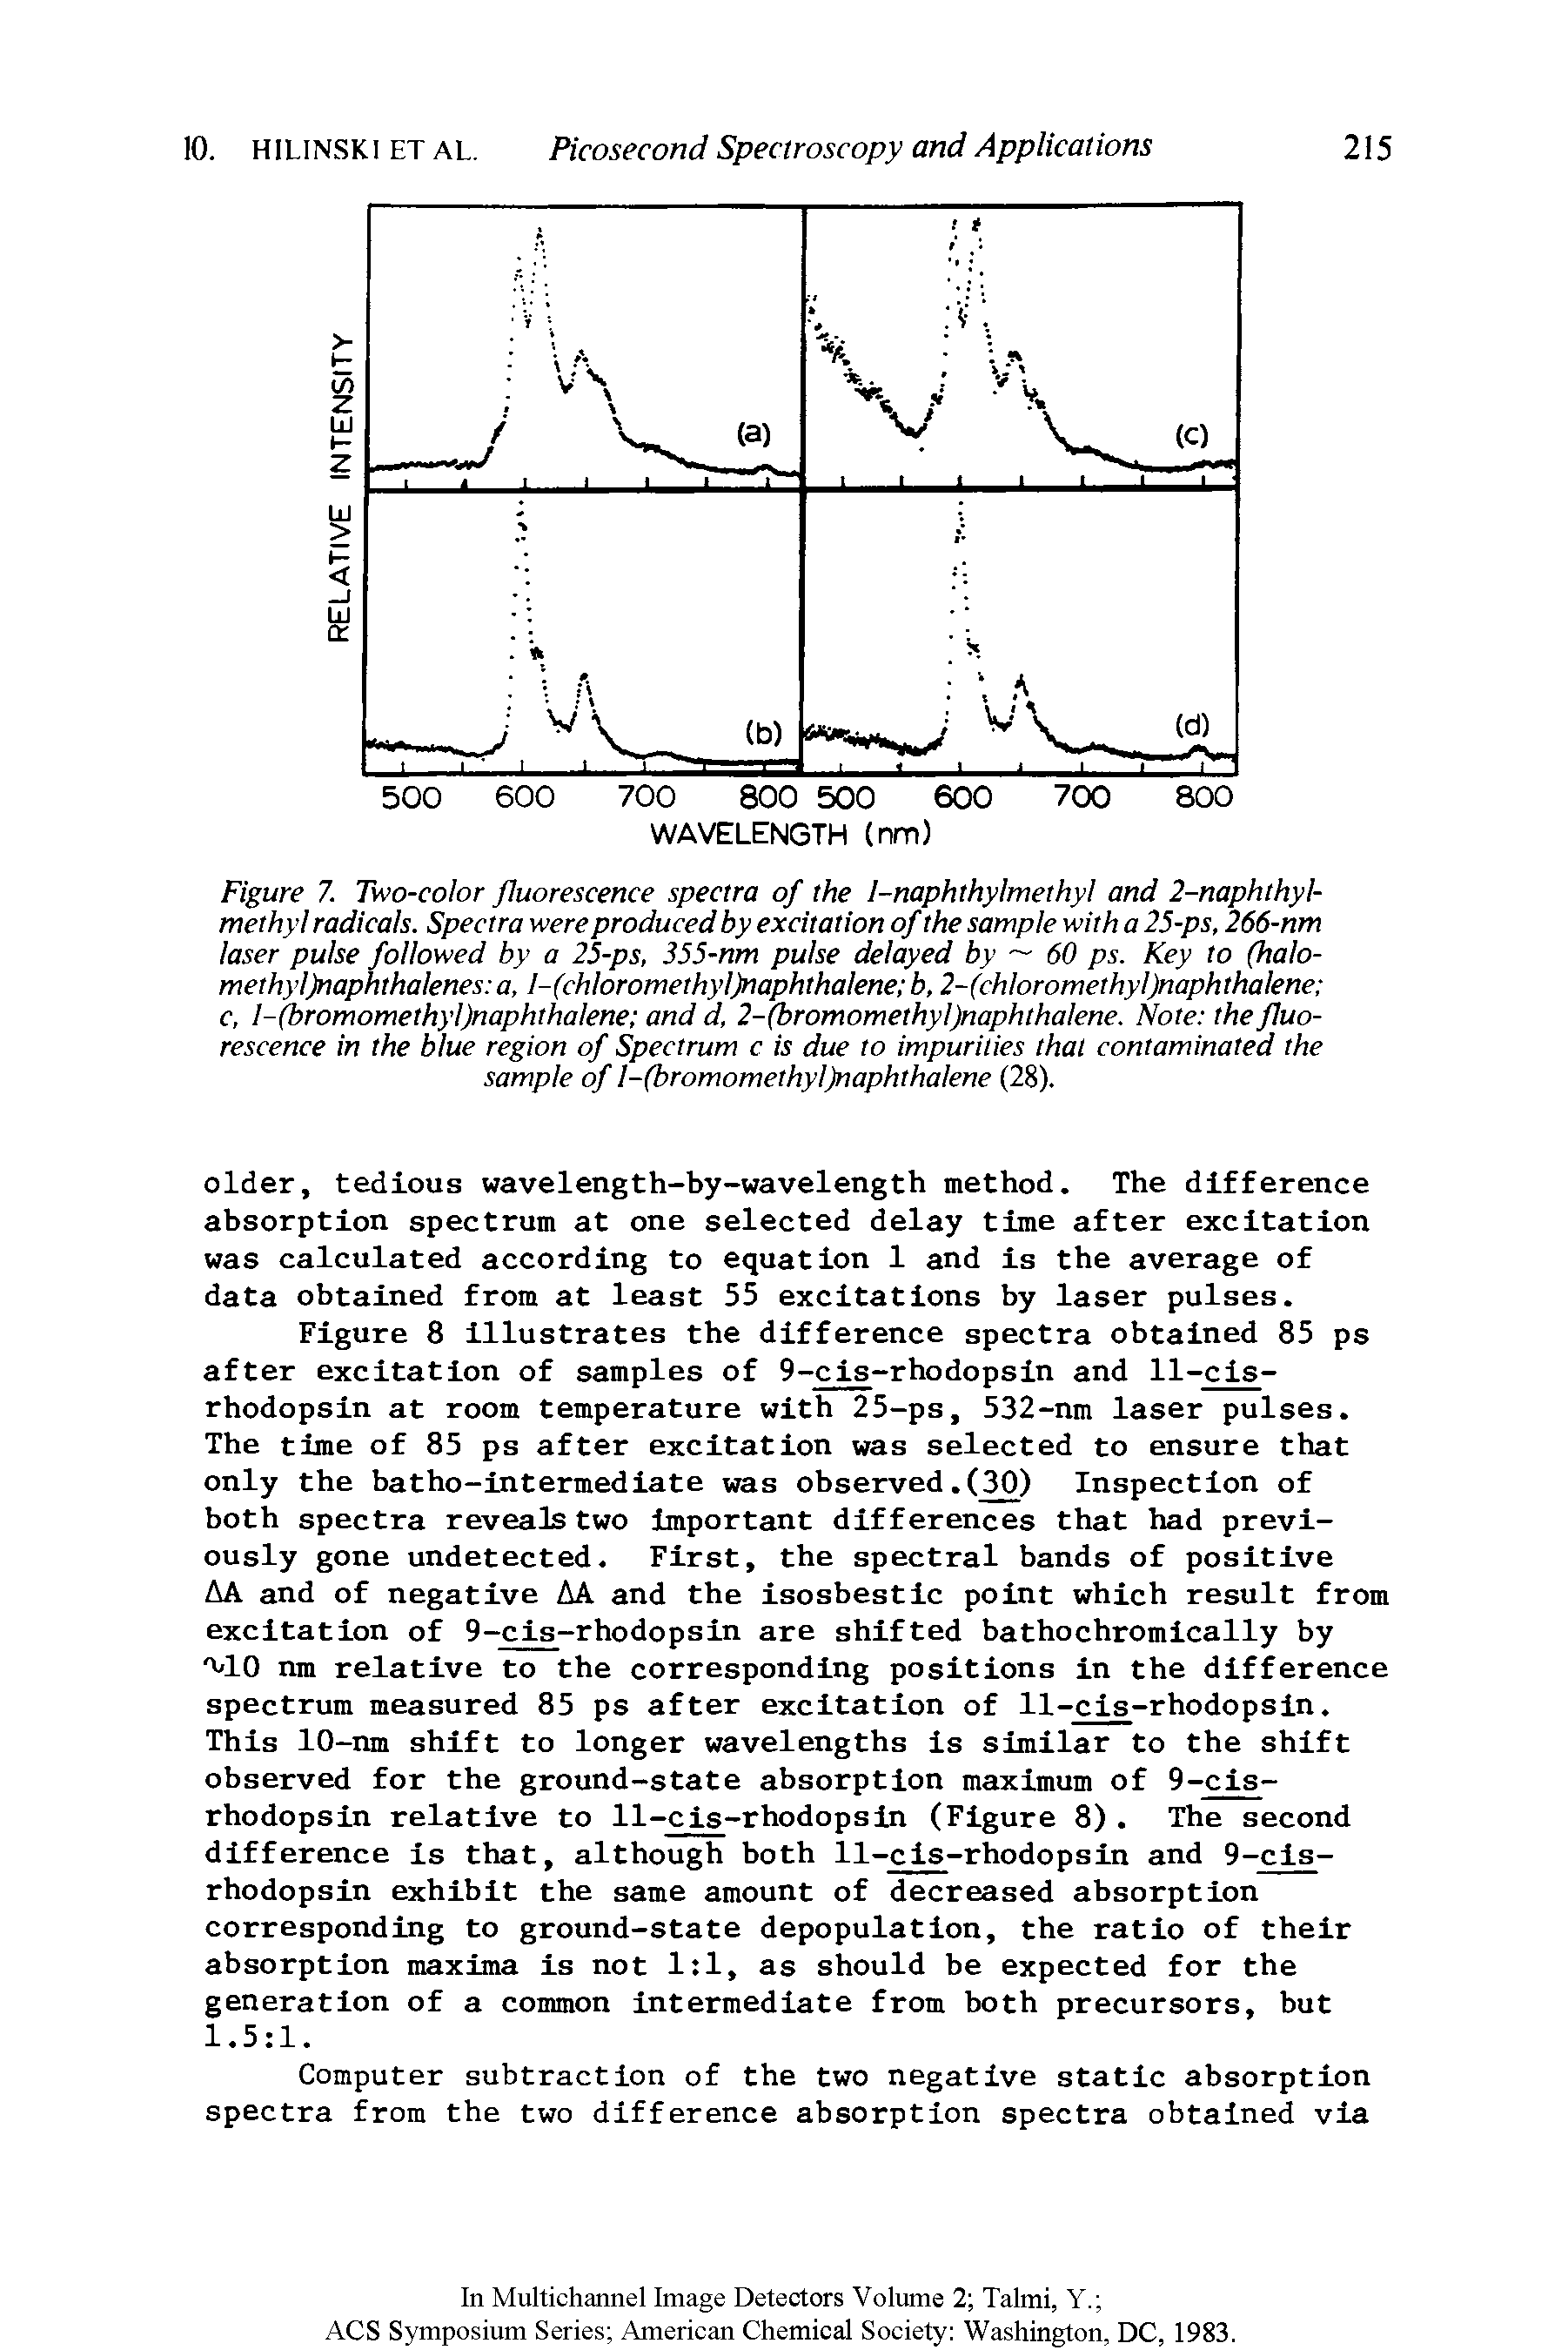 Figure 7. Two-color fluorescence spectra of the I-naphthylmethyi and 2-naphthyl-methyl radicals. Spectra were produced by excitation of the sample with a 25-ps, 266-nm laser pulse followed by a 25-ps, 355-nm pulse delayed by 60 ps. Key to (halo-methyljnaphthalenes a, I-(chIoromethyI)naphthaIene b, 2-(chloromethyl)naphthalene c, I-(bromomethyI)naphthalene and d, 2-(bromomethyl)naphthalene. Note the fluorescence in the blue region of Spectrum c is due to impurities that contaminated the sample of l-(bromomethyl)naphthalene (28).